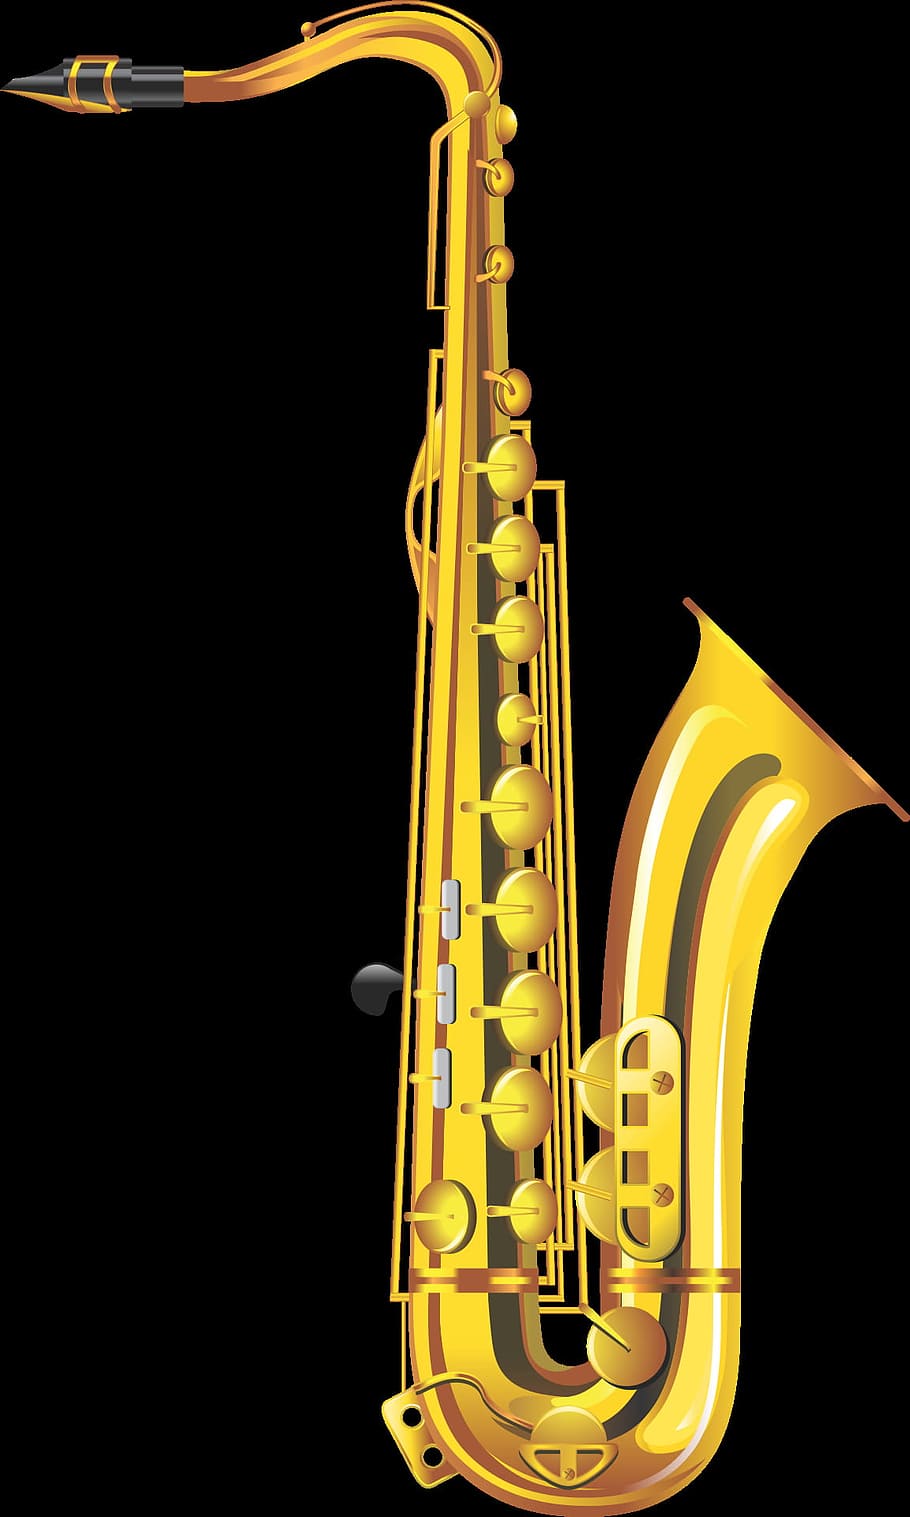 saxophone, graphic, graphical, object, music, musical, yellow, studio shot, black background, arts culture and entertainment